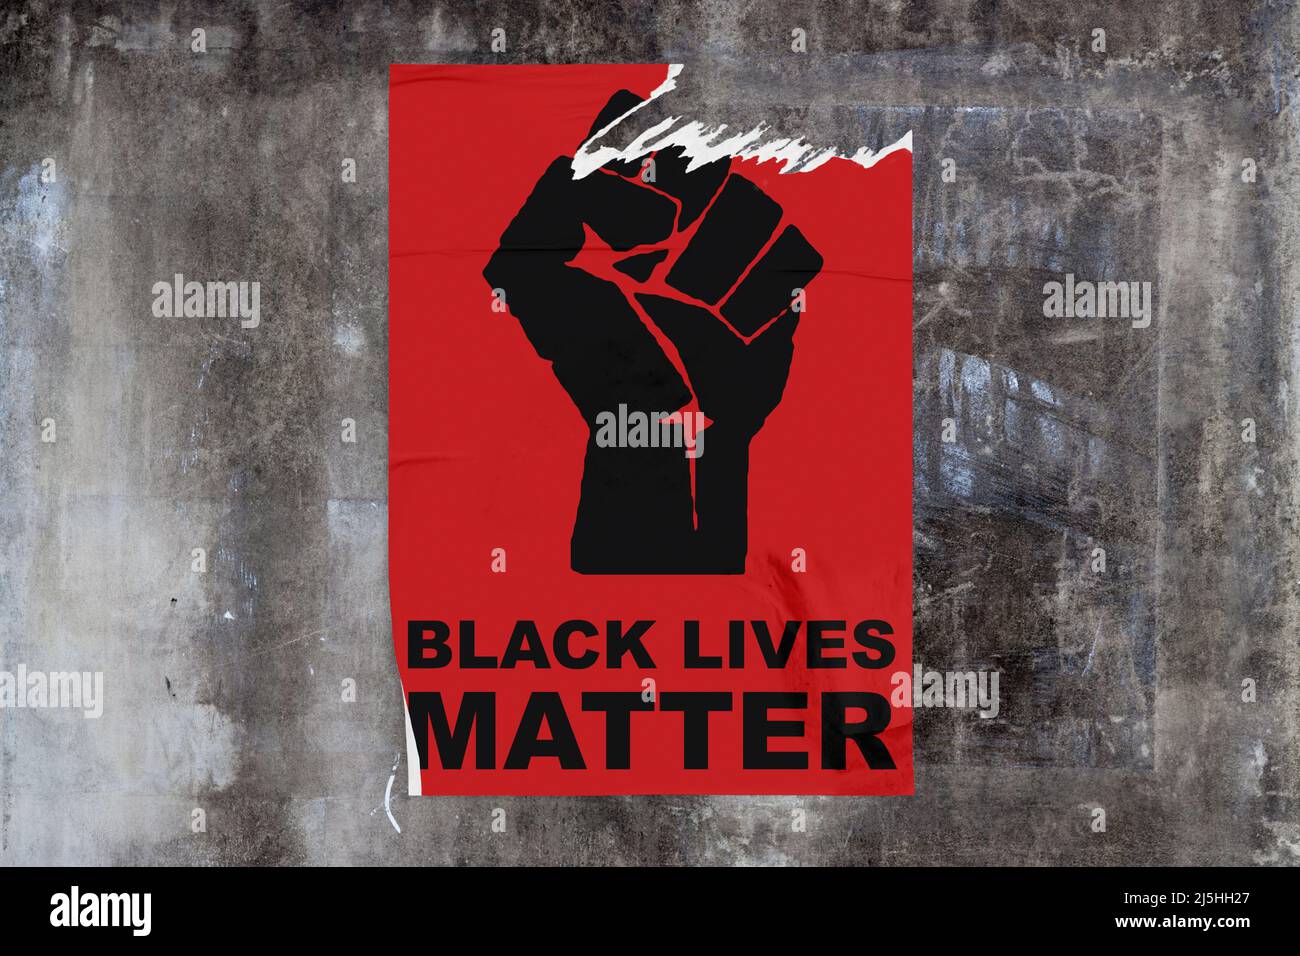 Full-frame weathered concrete wall with a torn red poster in the middle dispicting a black fist with 'Black lives matter' written bellow. Stock Photo